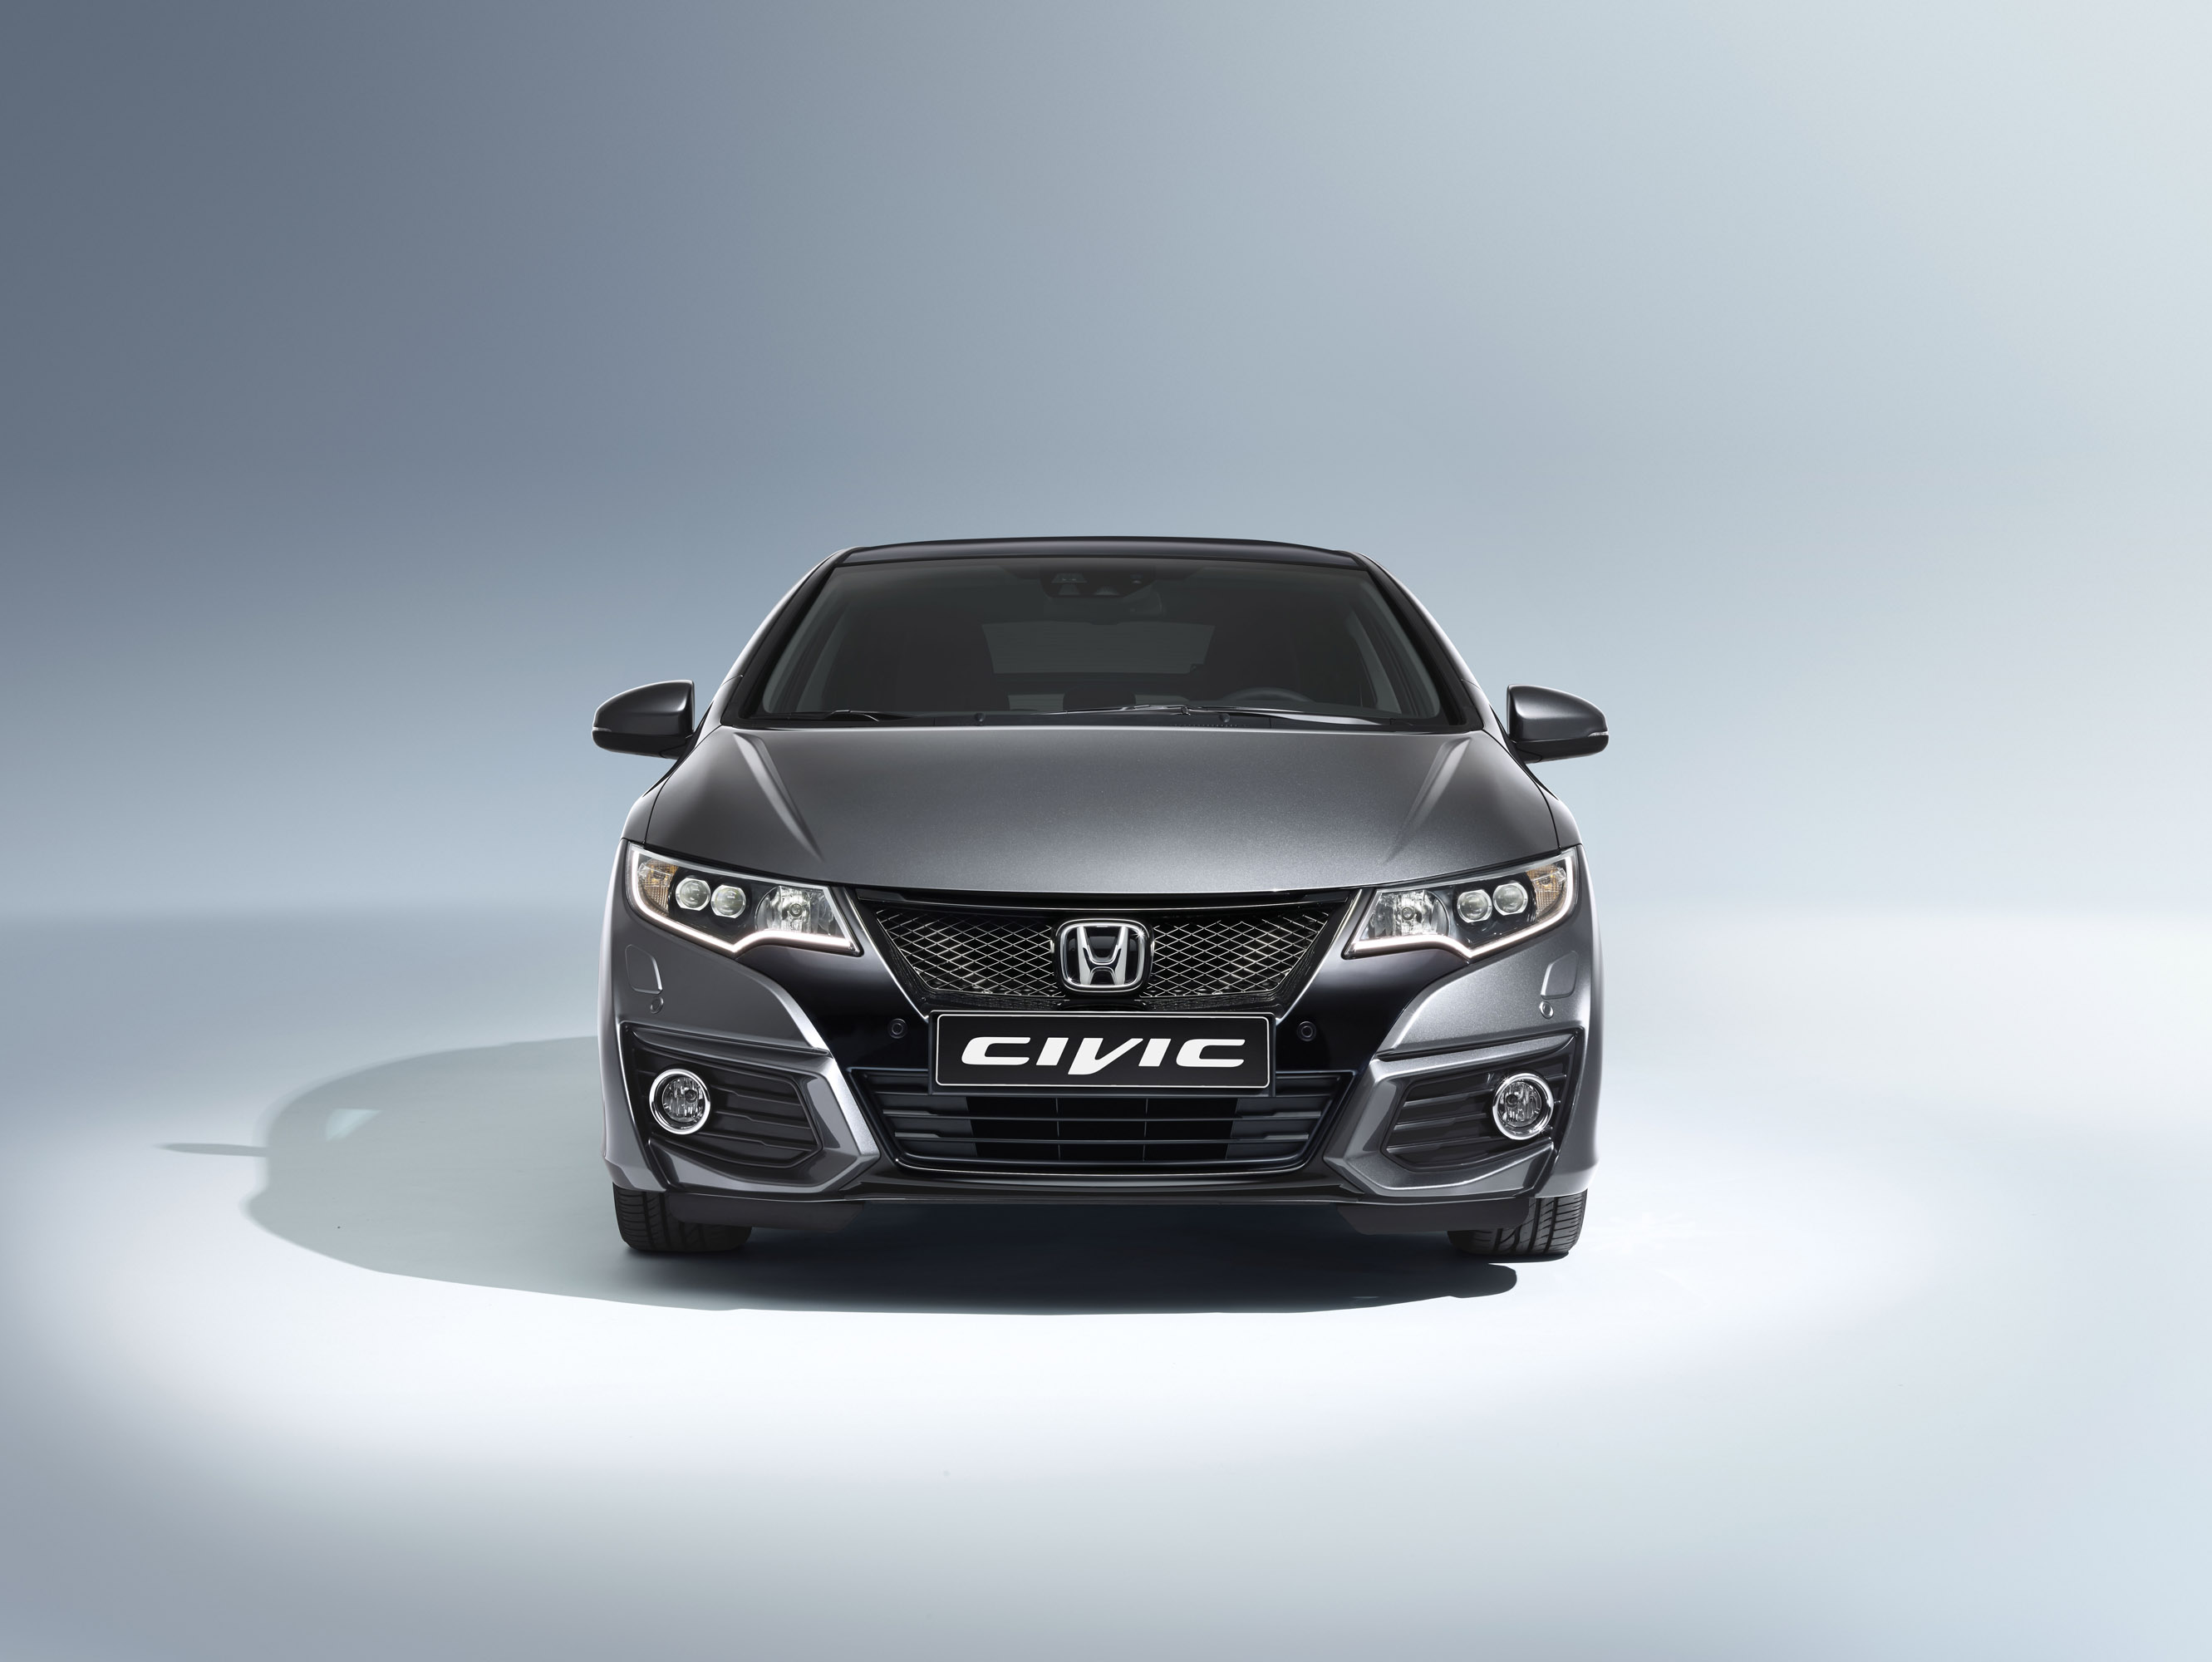 2015 Honda Civic Sport Hd Pictures